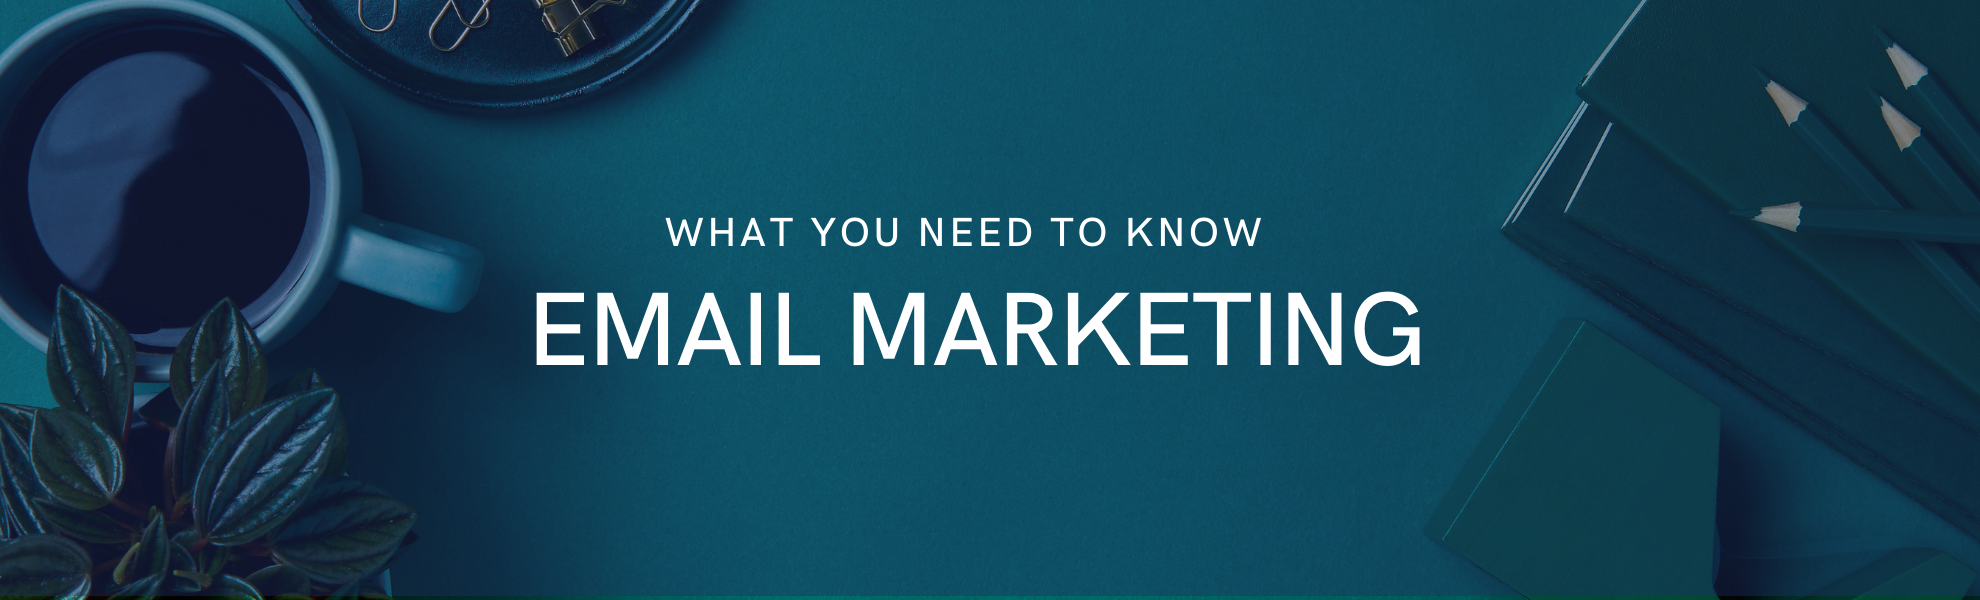 Email Marketing - what you need to know